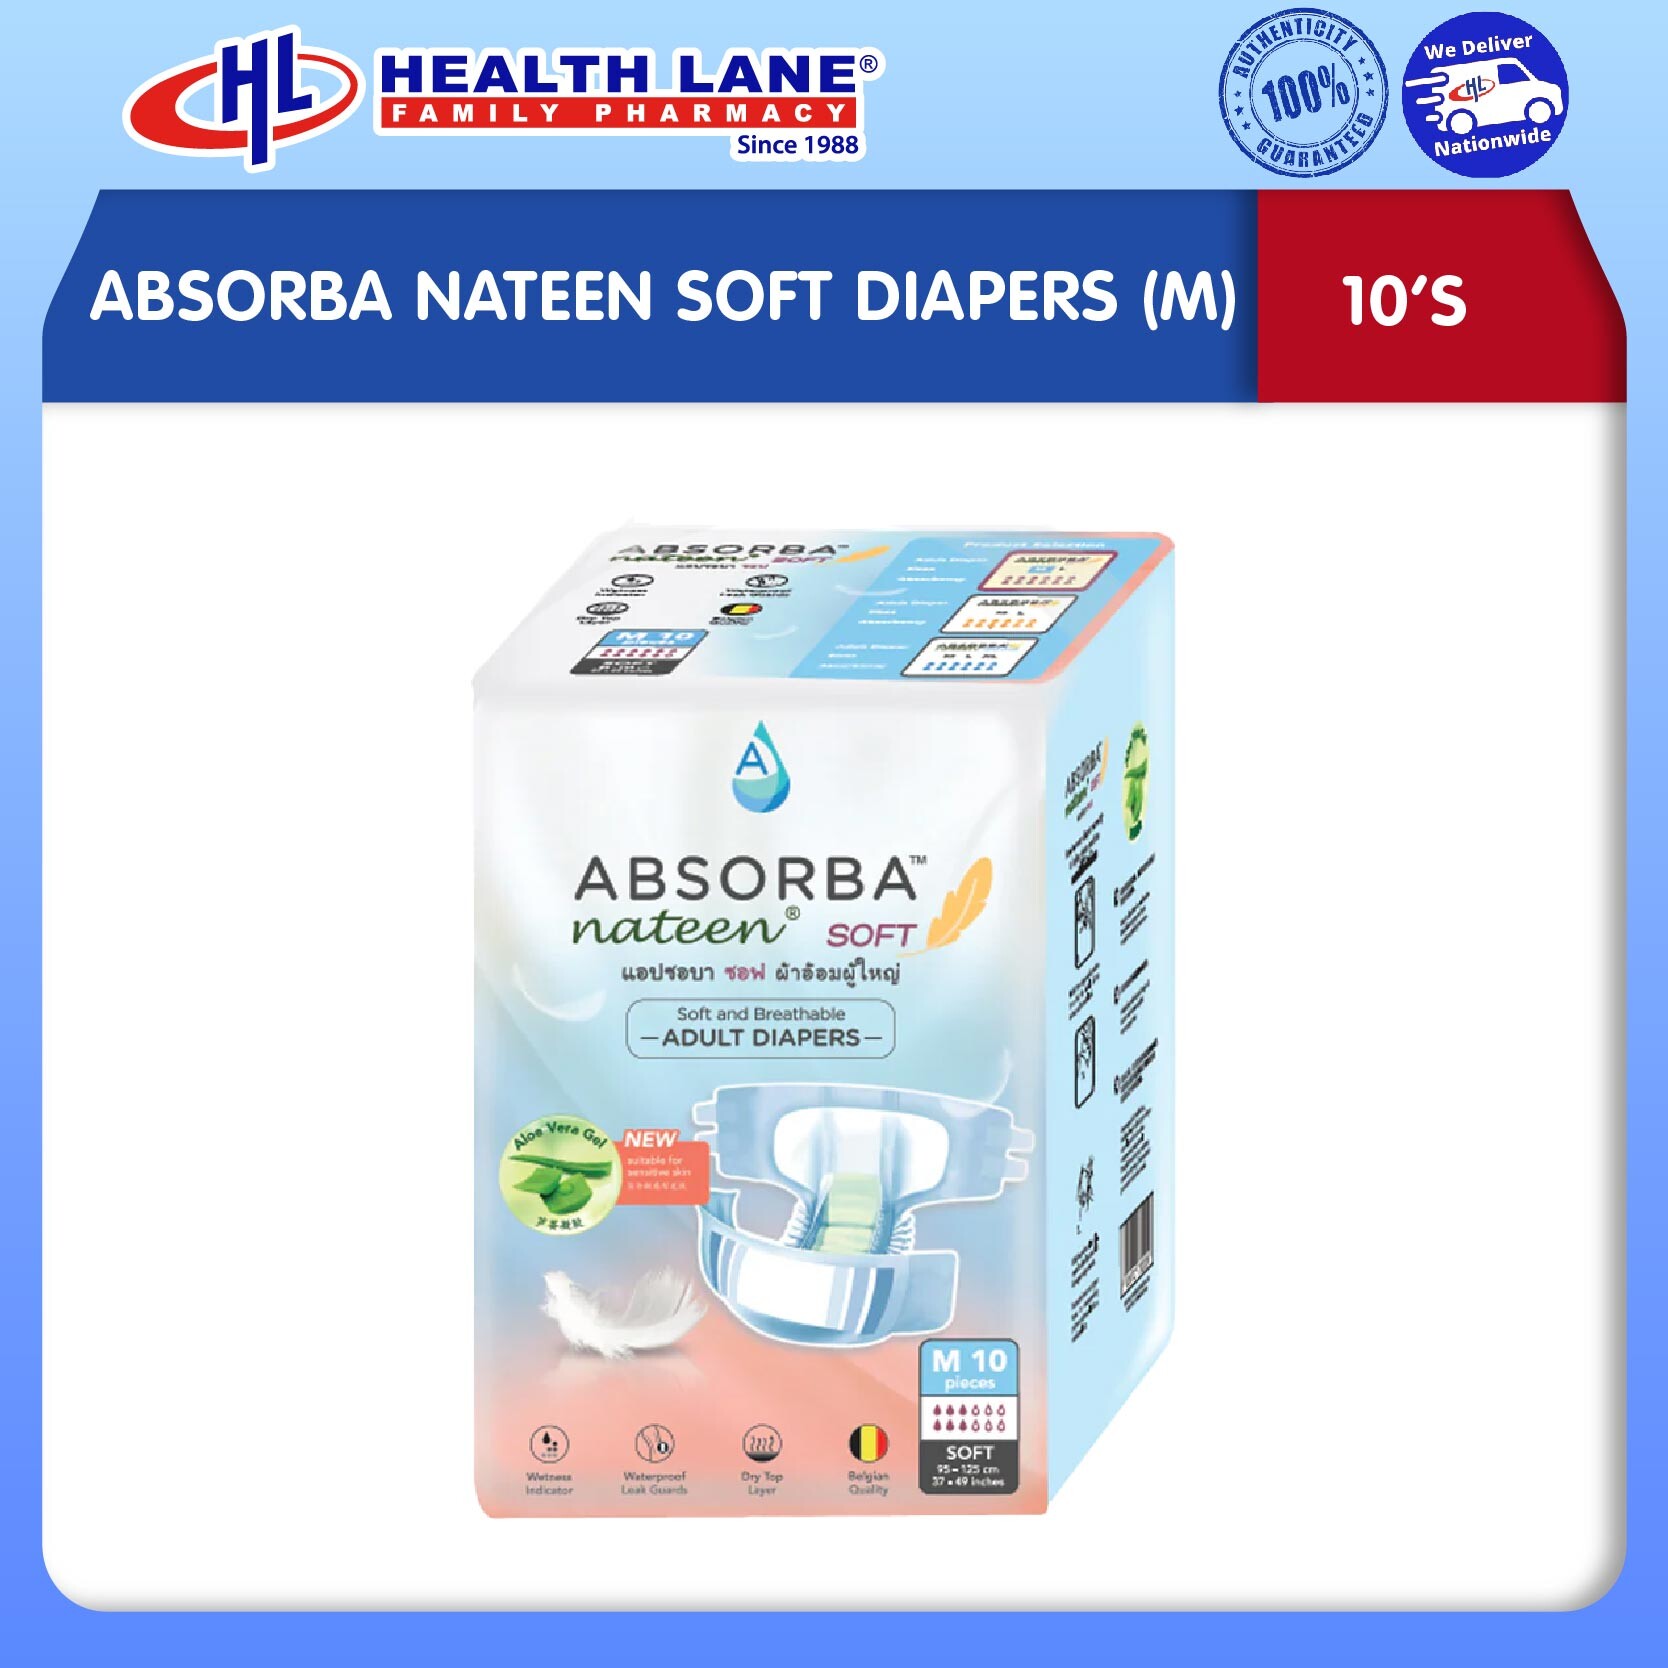 ABSORBA NATEEN SOFT DIAPERS (M) 10'S